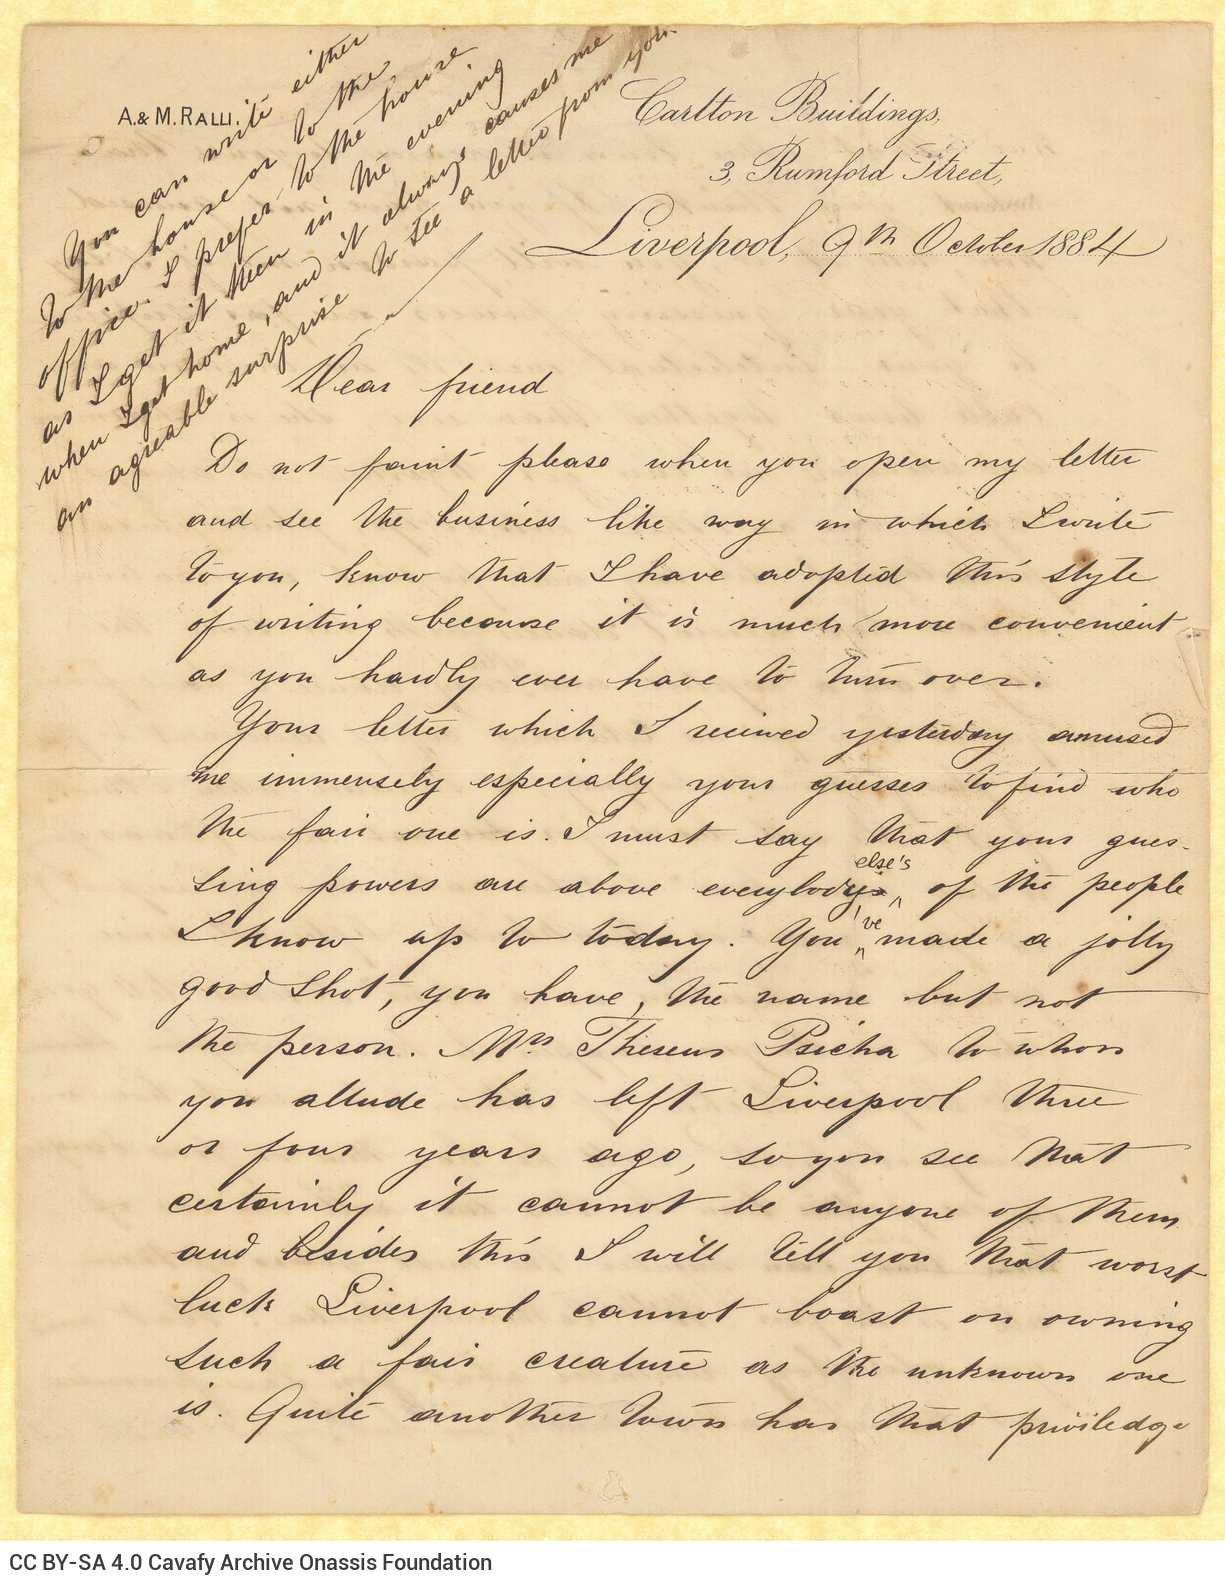 Handwritten letter by John [Rodocanachi] to Cavafy on all sides of a bifolio. It is a reply to a letter by the poet. Extensiv